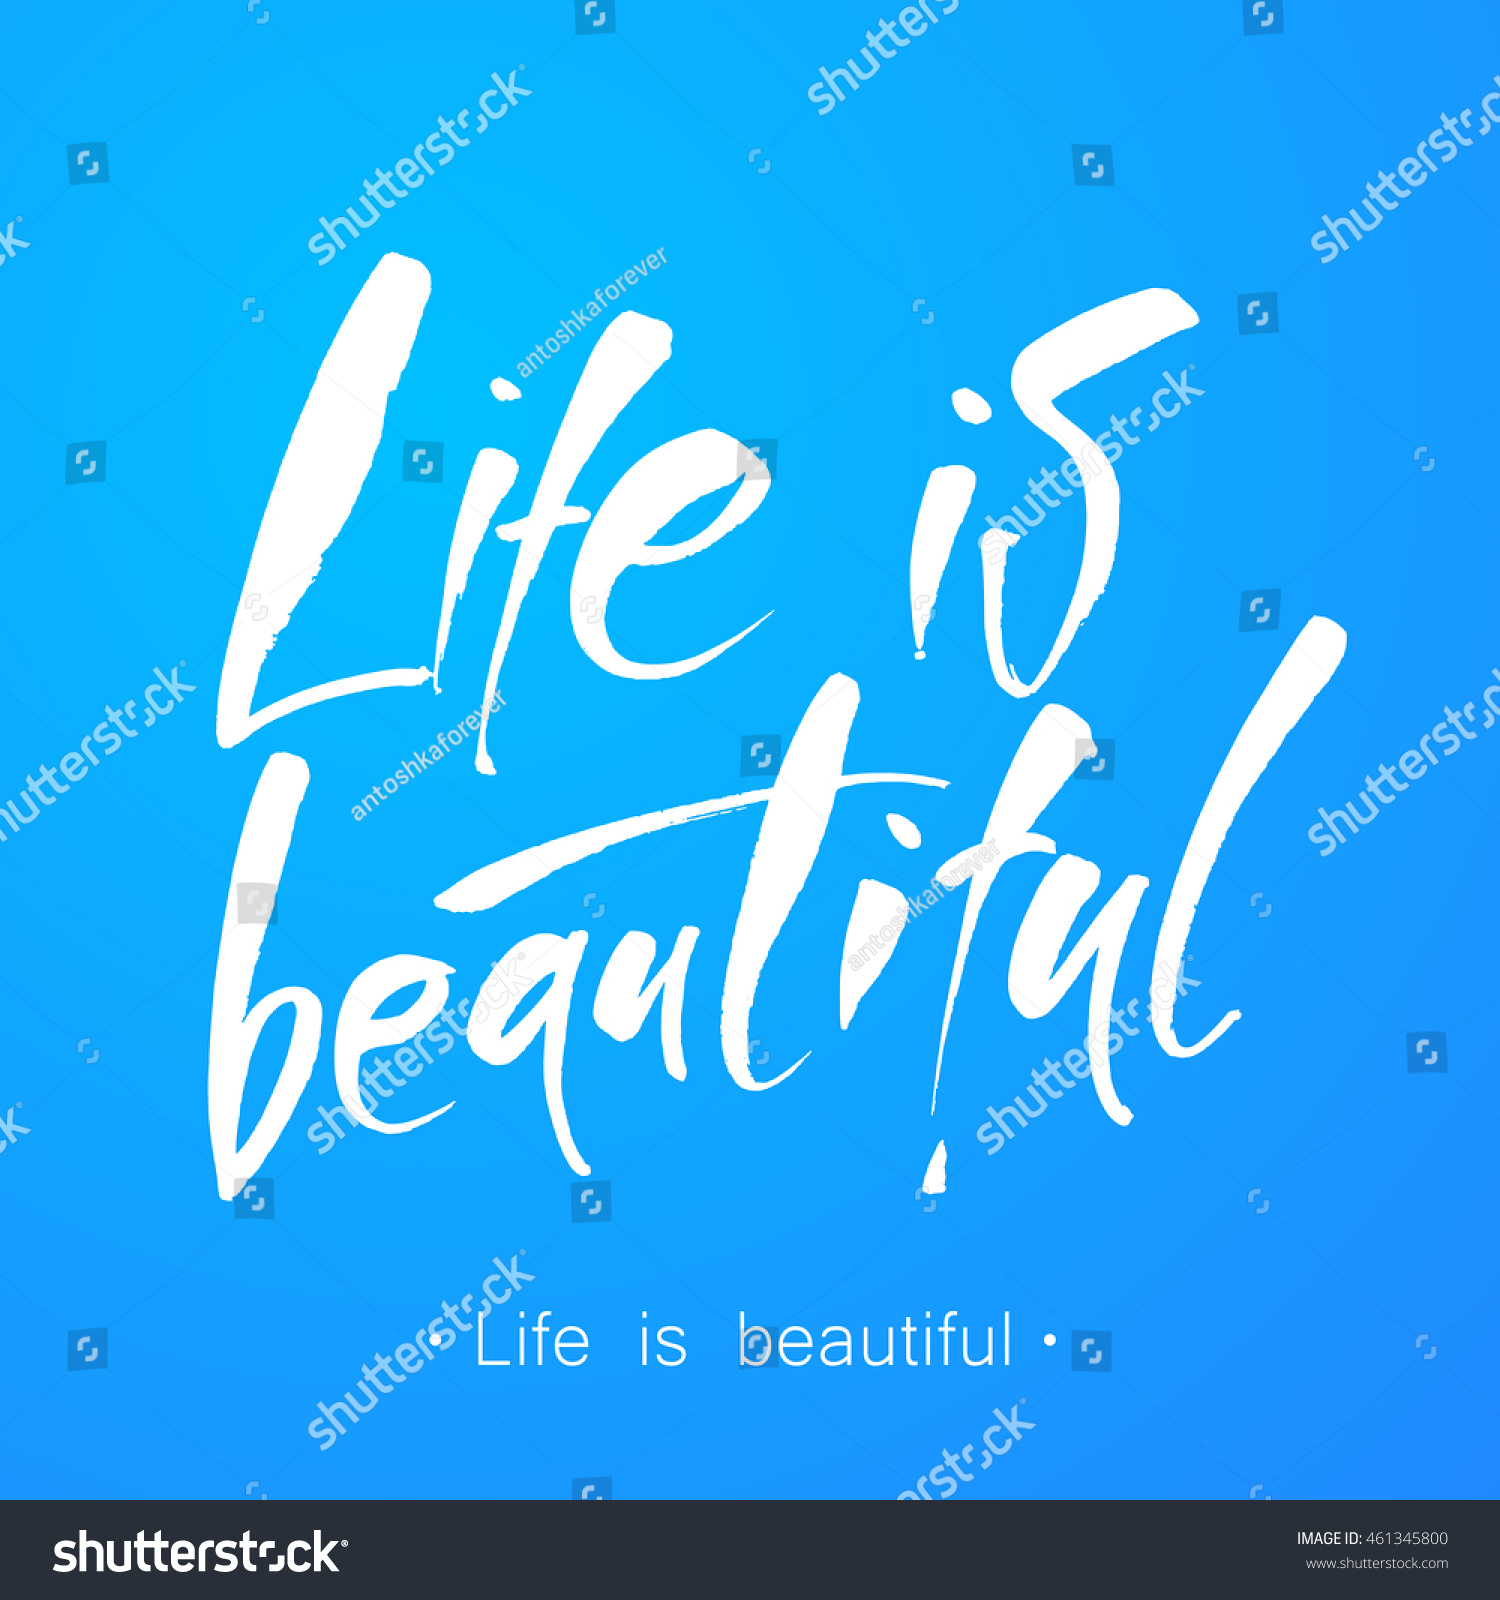 life is beautiful picture quotes life beautiful hand lettering positive life stock vector